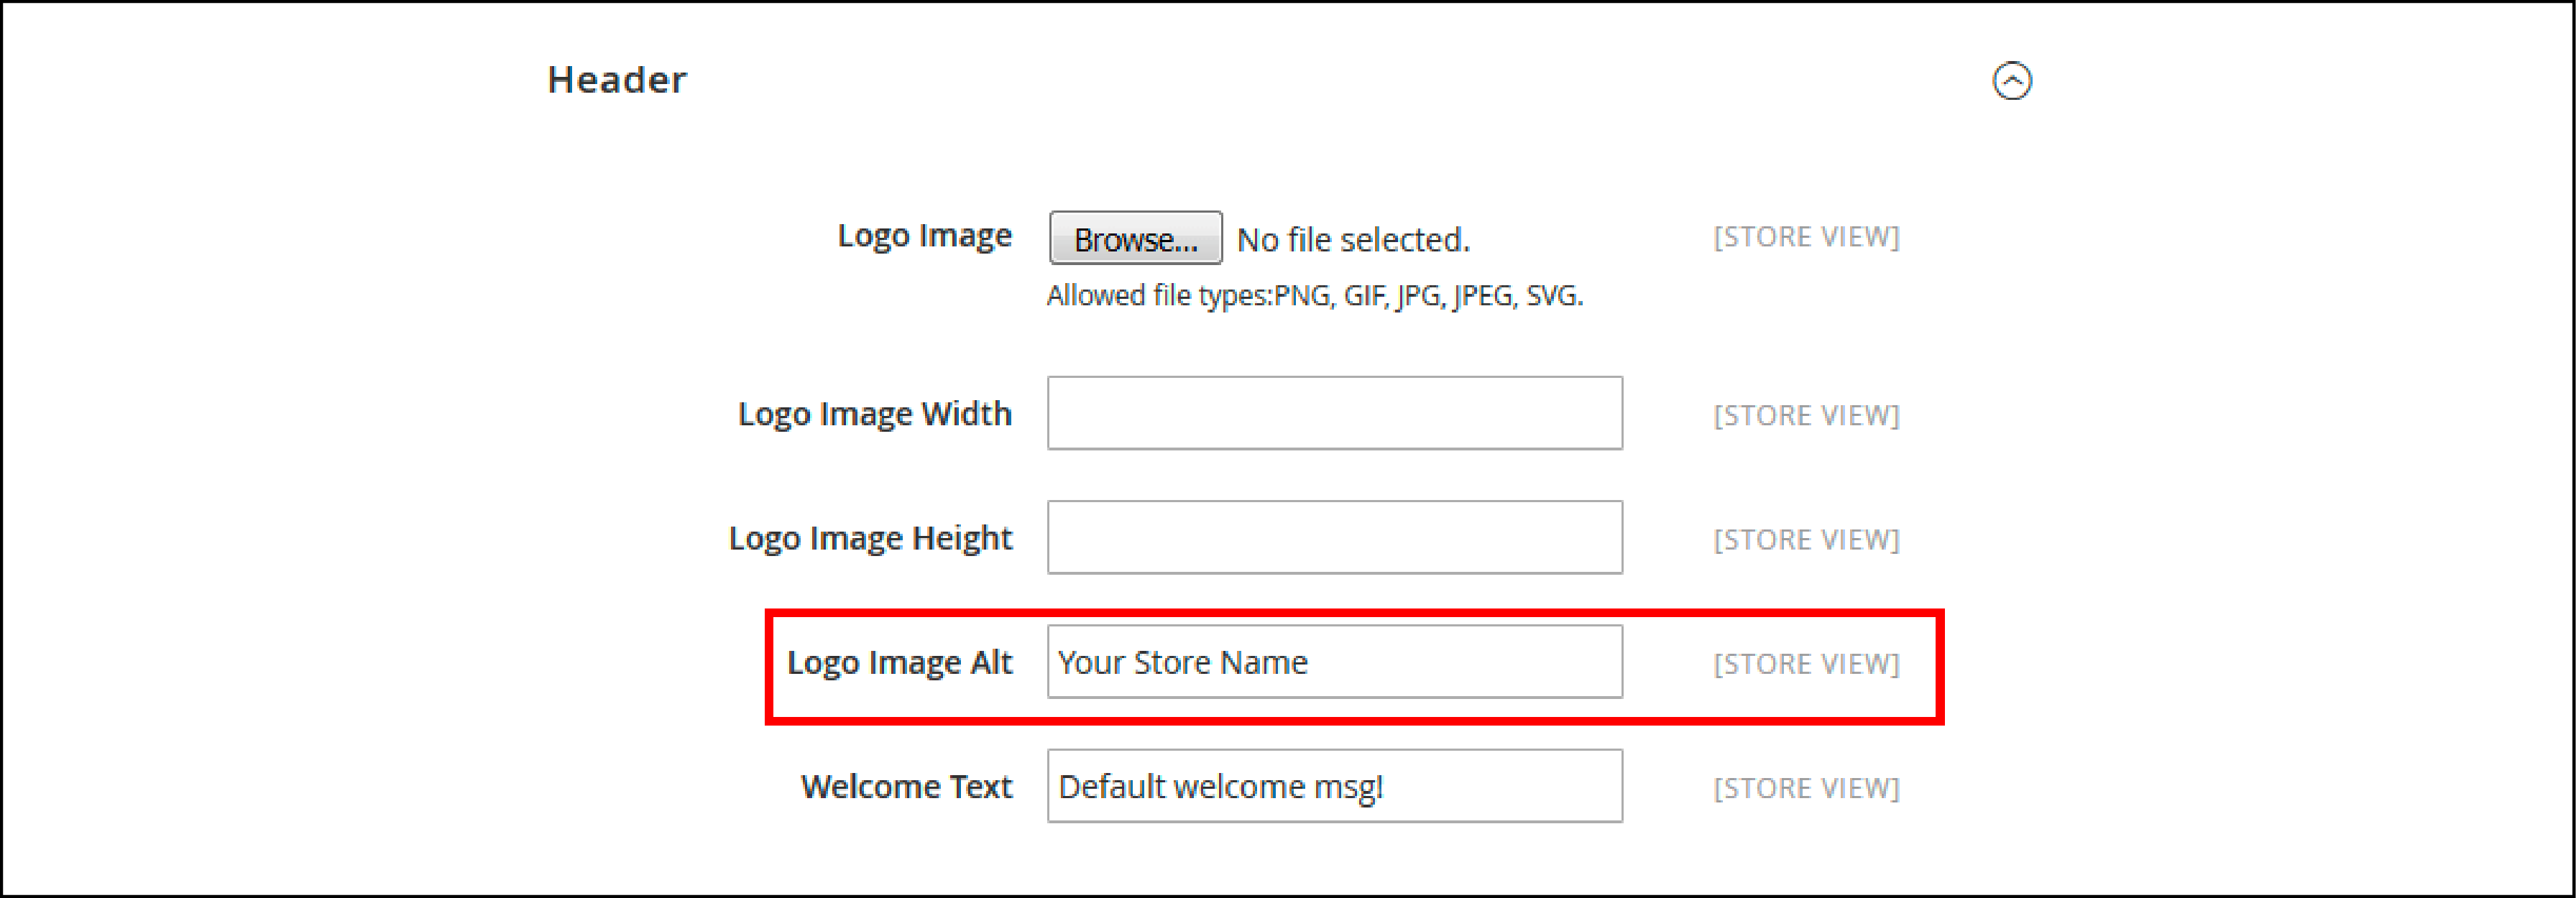 A screenshot of Images optimization for Magento 2